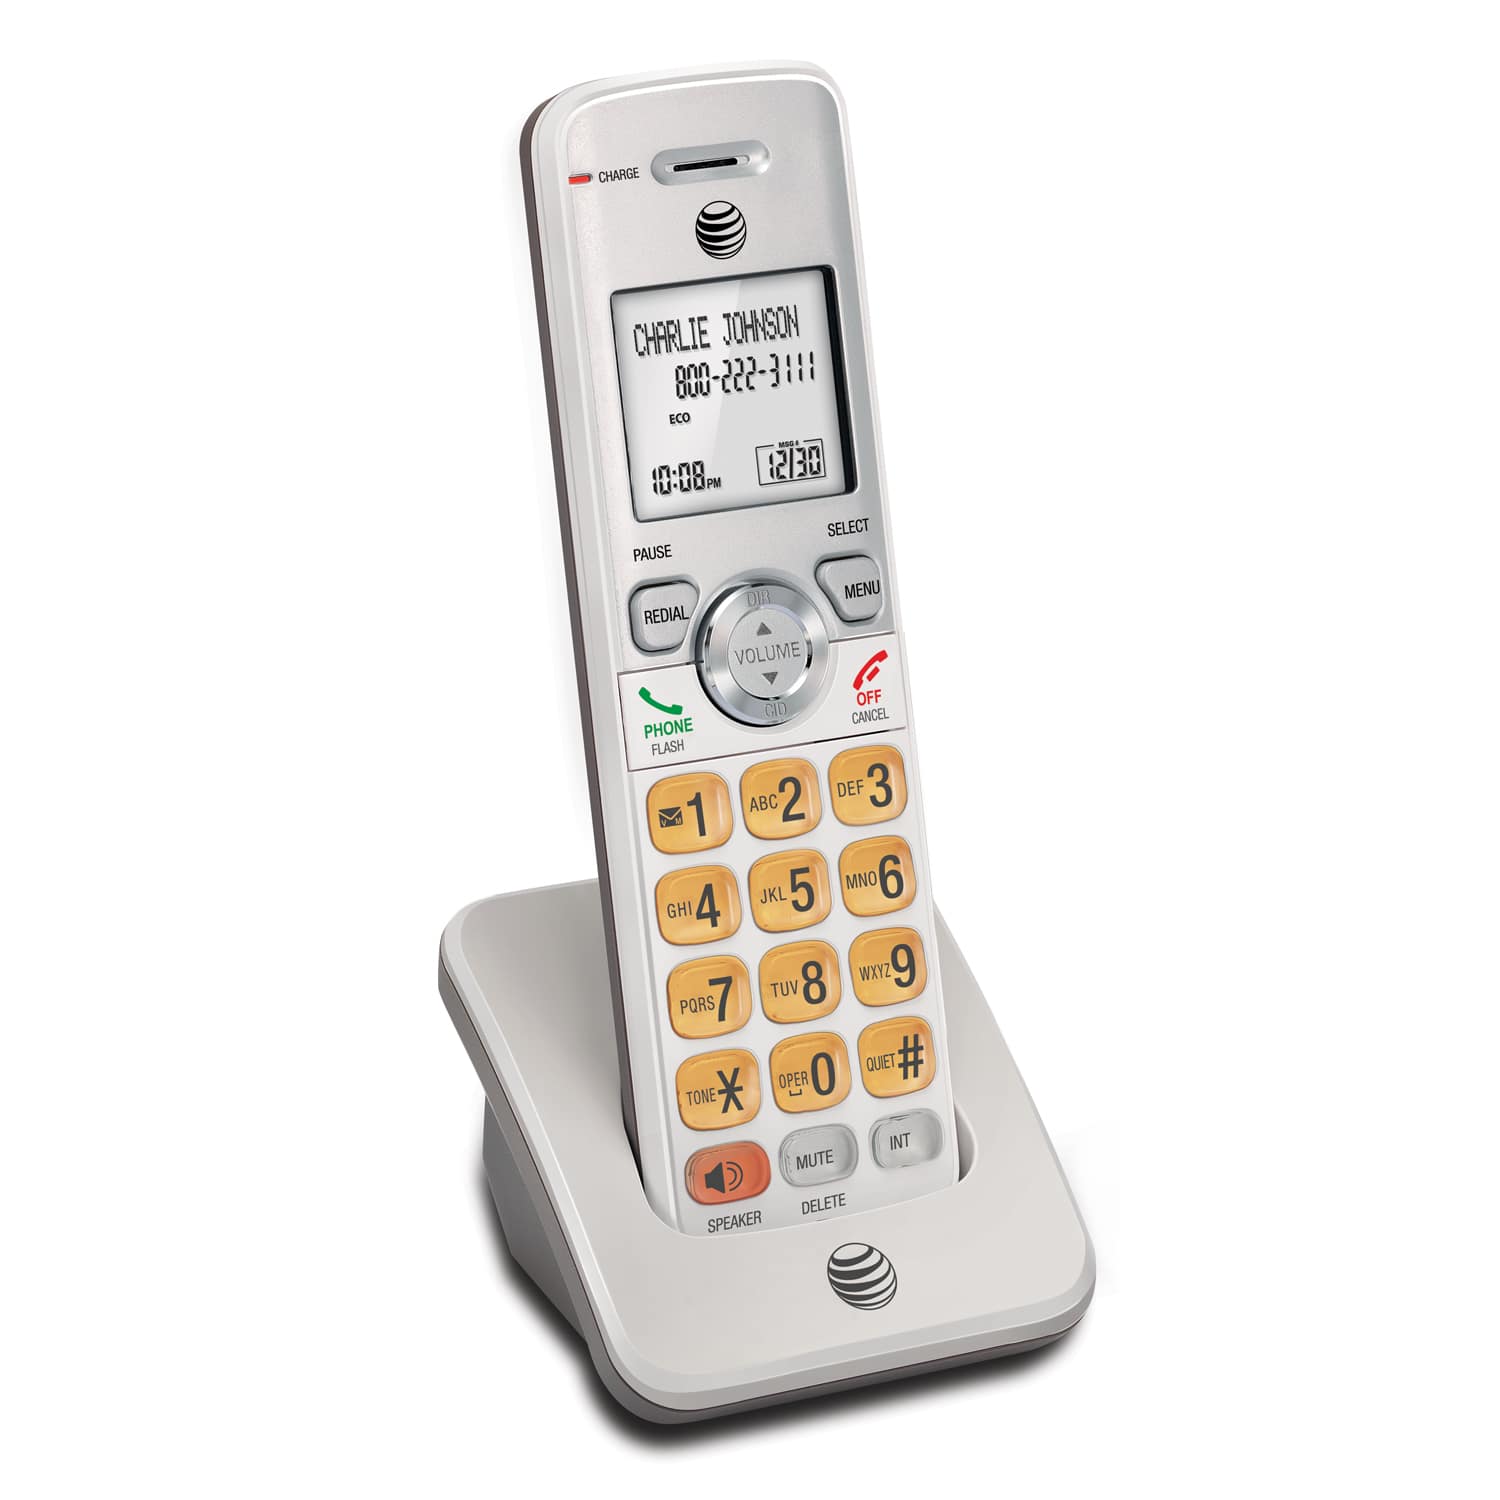 Accessory handset with Caller ID/call waiting - view 3